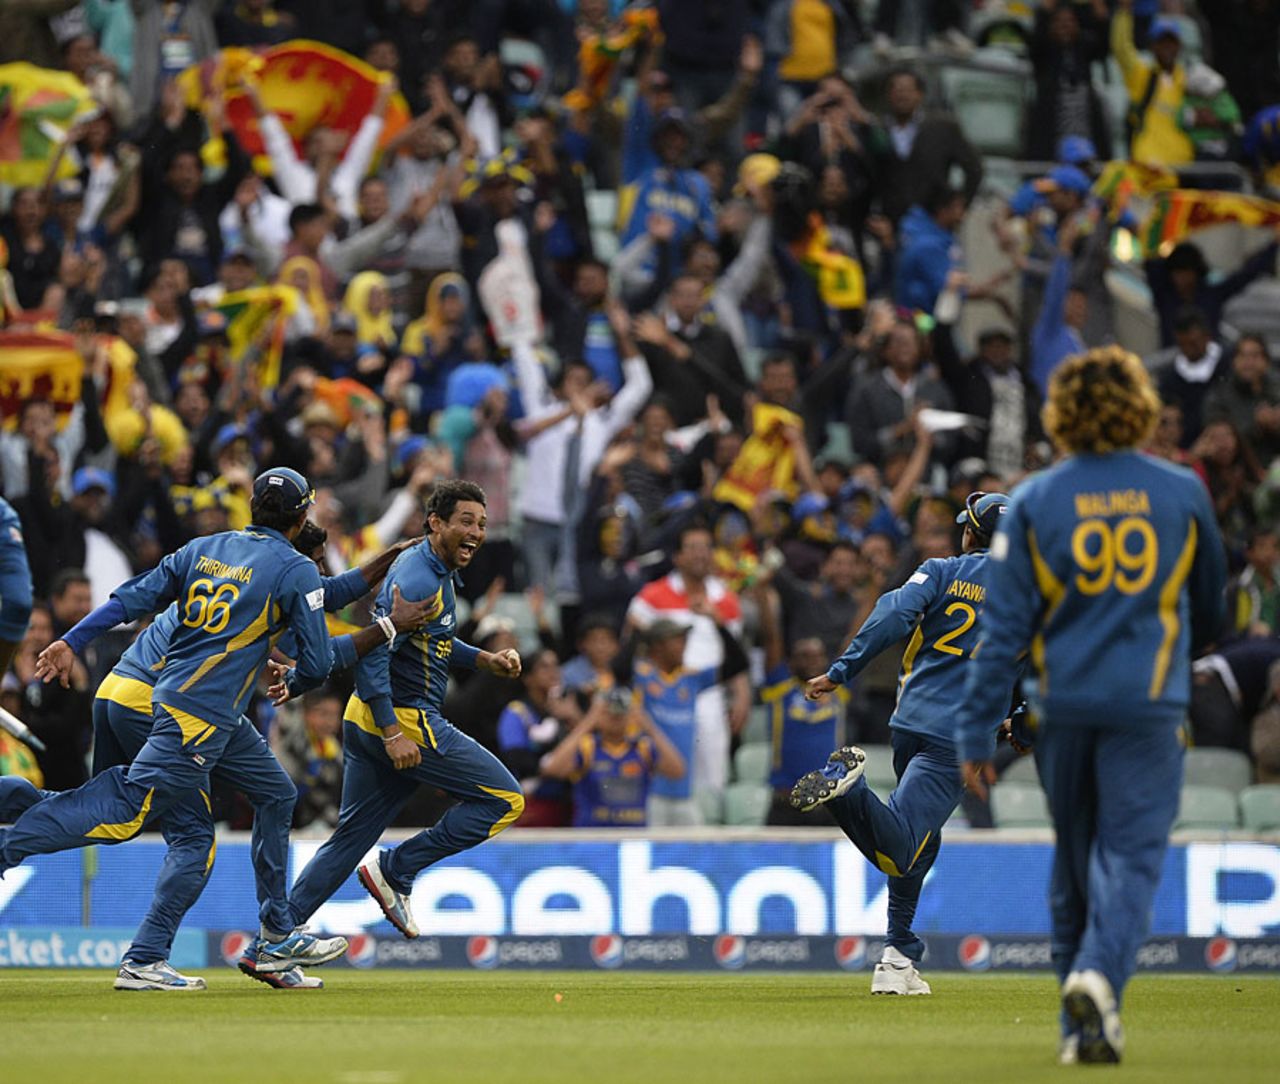 Tillakaratne Dilshan gets chased by his team-mates, Australia v Sri Lanka, Champions Trophy, Group A, The Oval, June 17, 2013